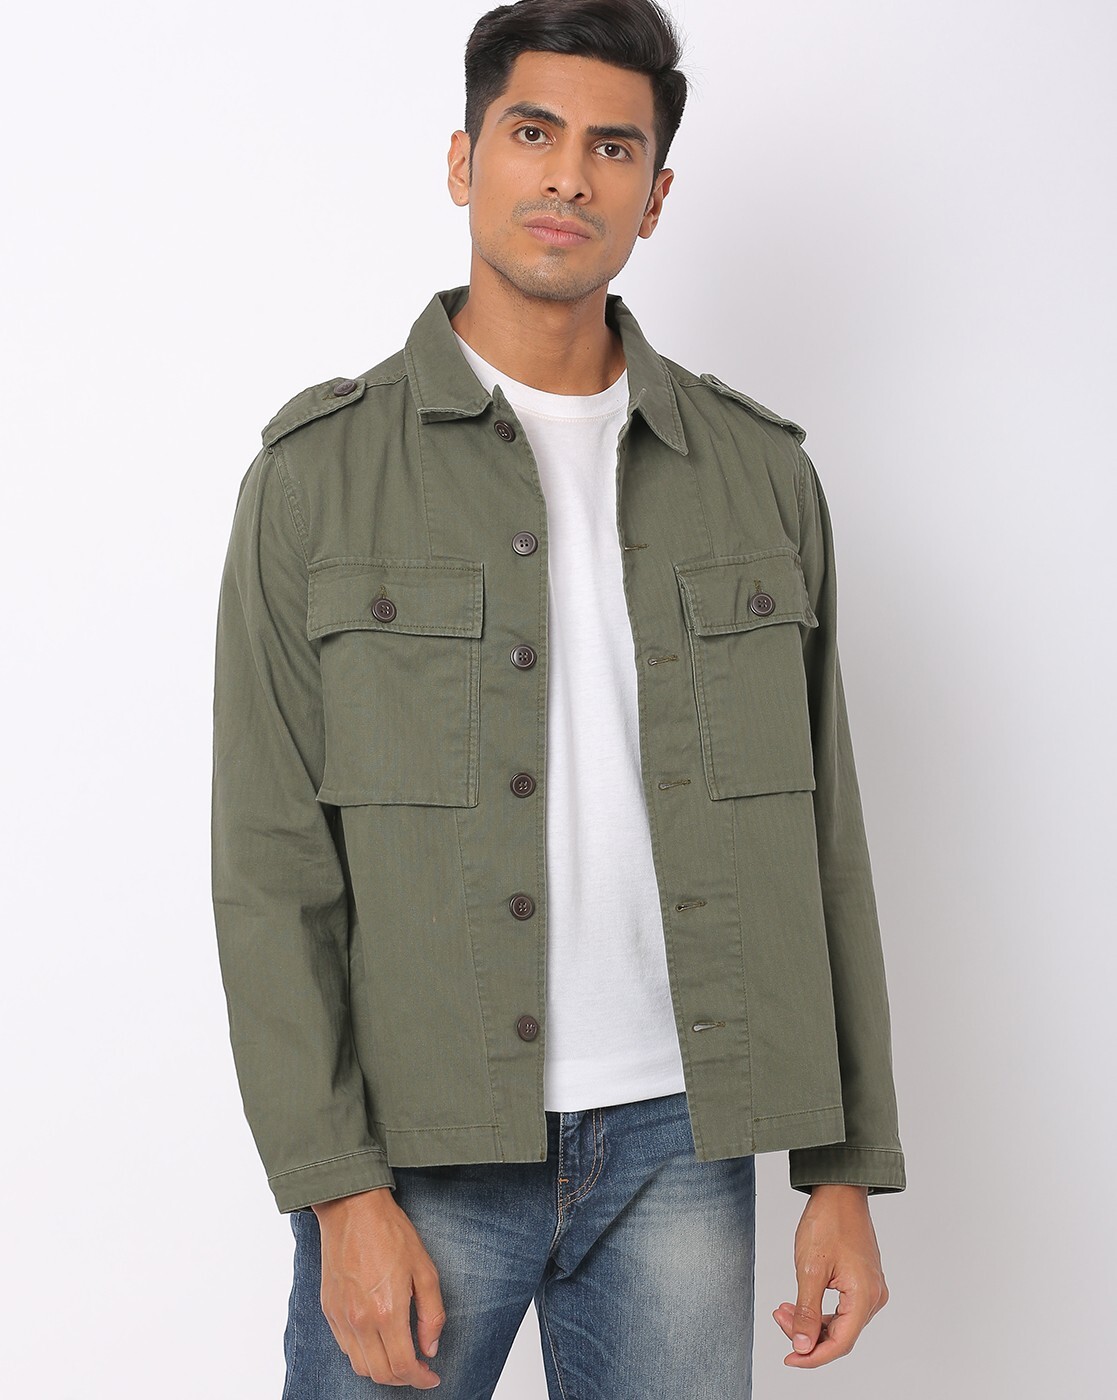 Buy Green Jackets ☀ Coats for Men by ...